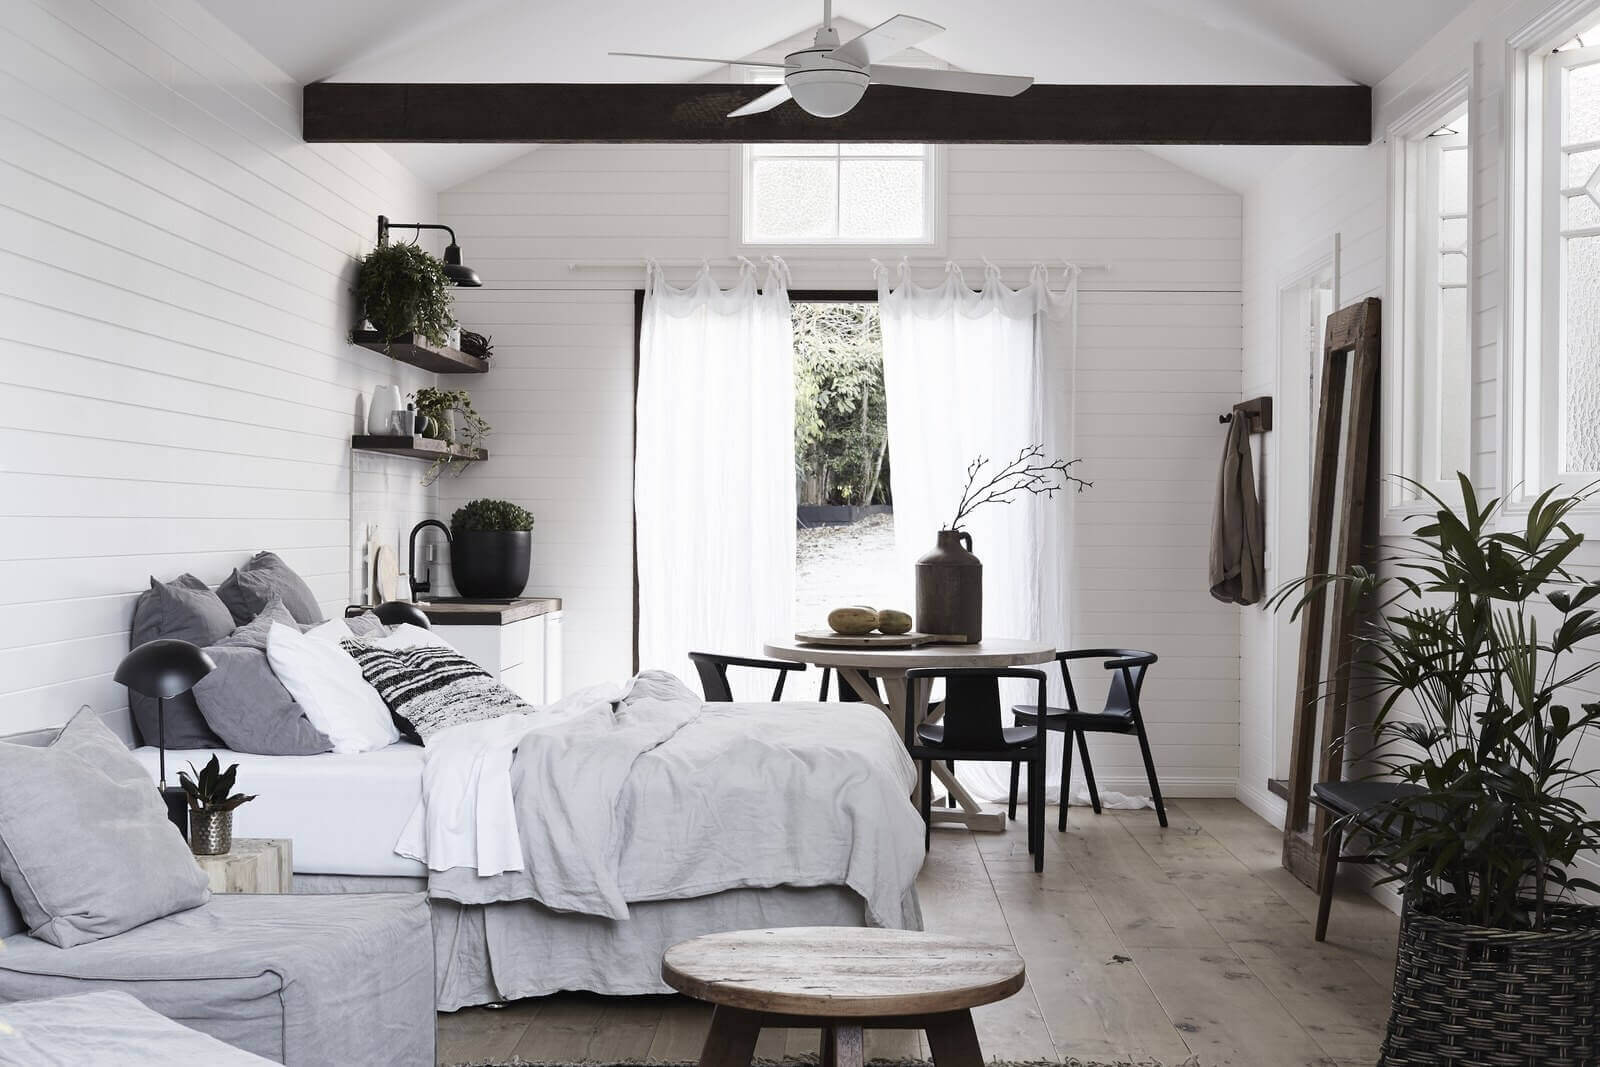 The Bower Barn featured in Architectural Digest article - A Design Lover’s Guide to Byron Bay—the Montauk of Australia